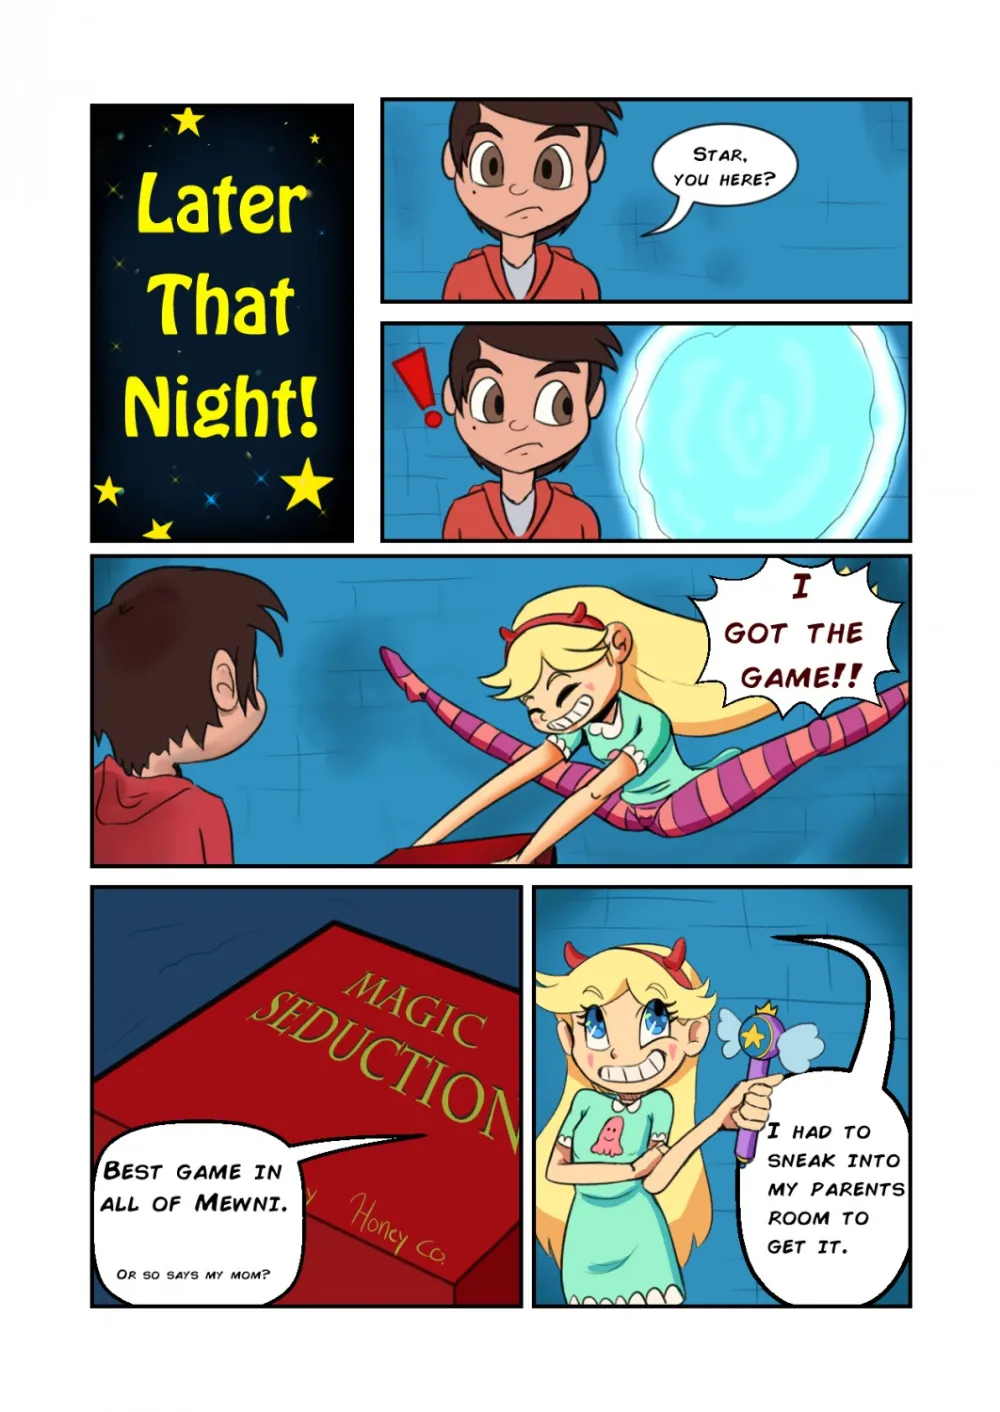 Star Vs. the board game of lust - Page 3